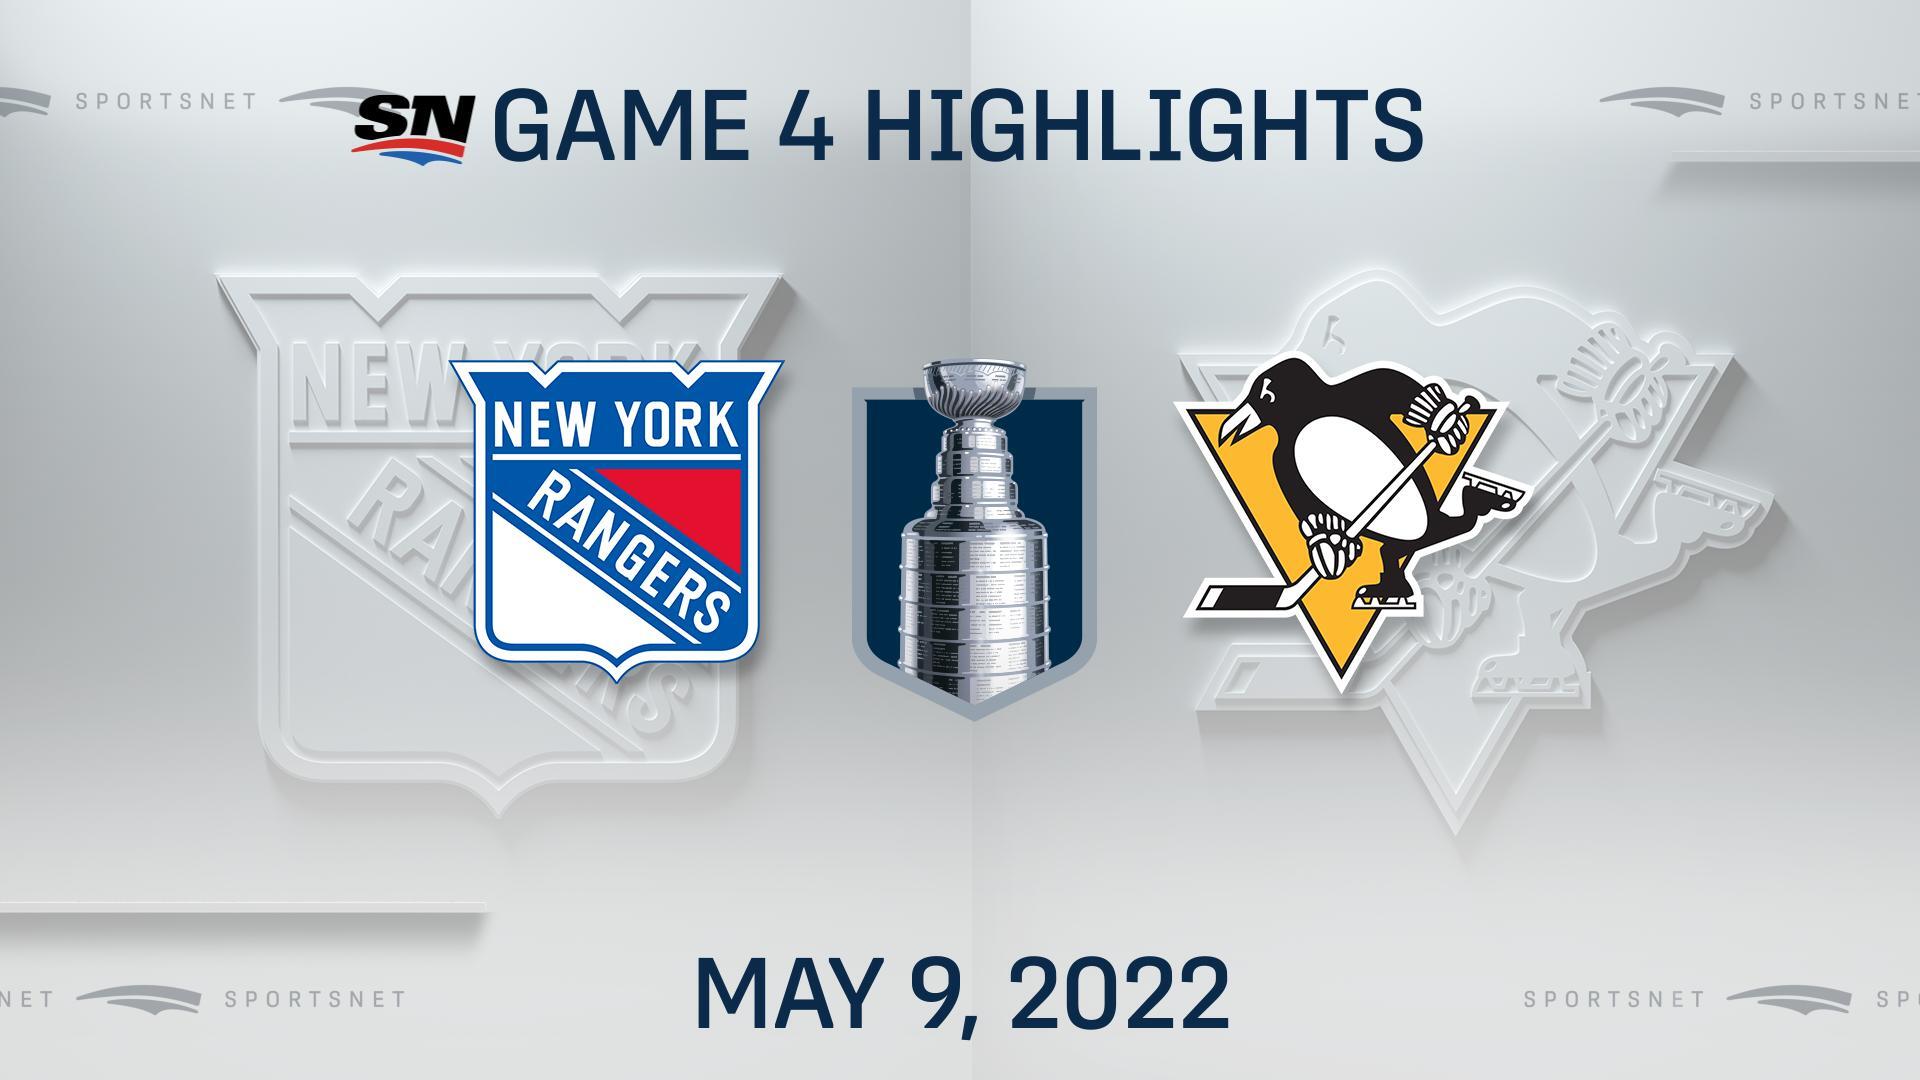 Penguins Take a 3-1 Lead in N.H.L. Playoff Series With Rangers - The New  York Times